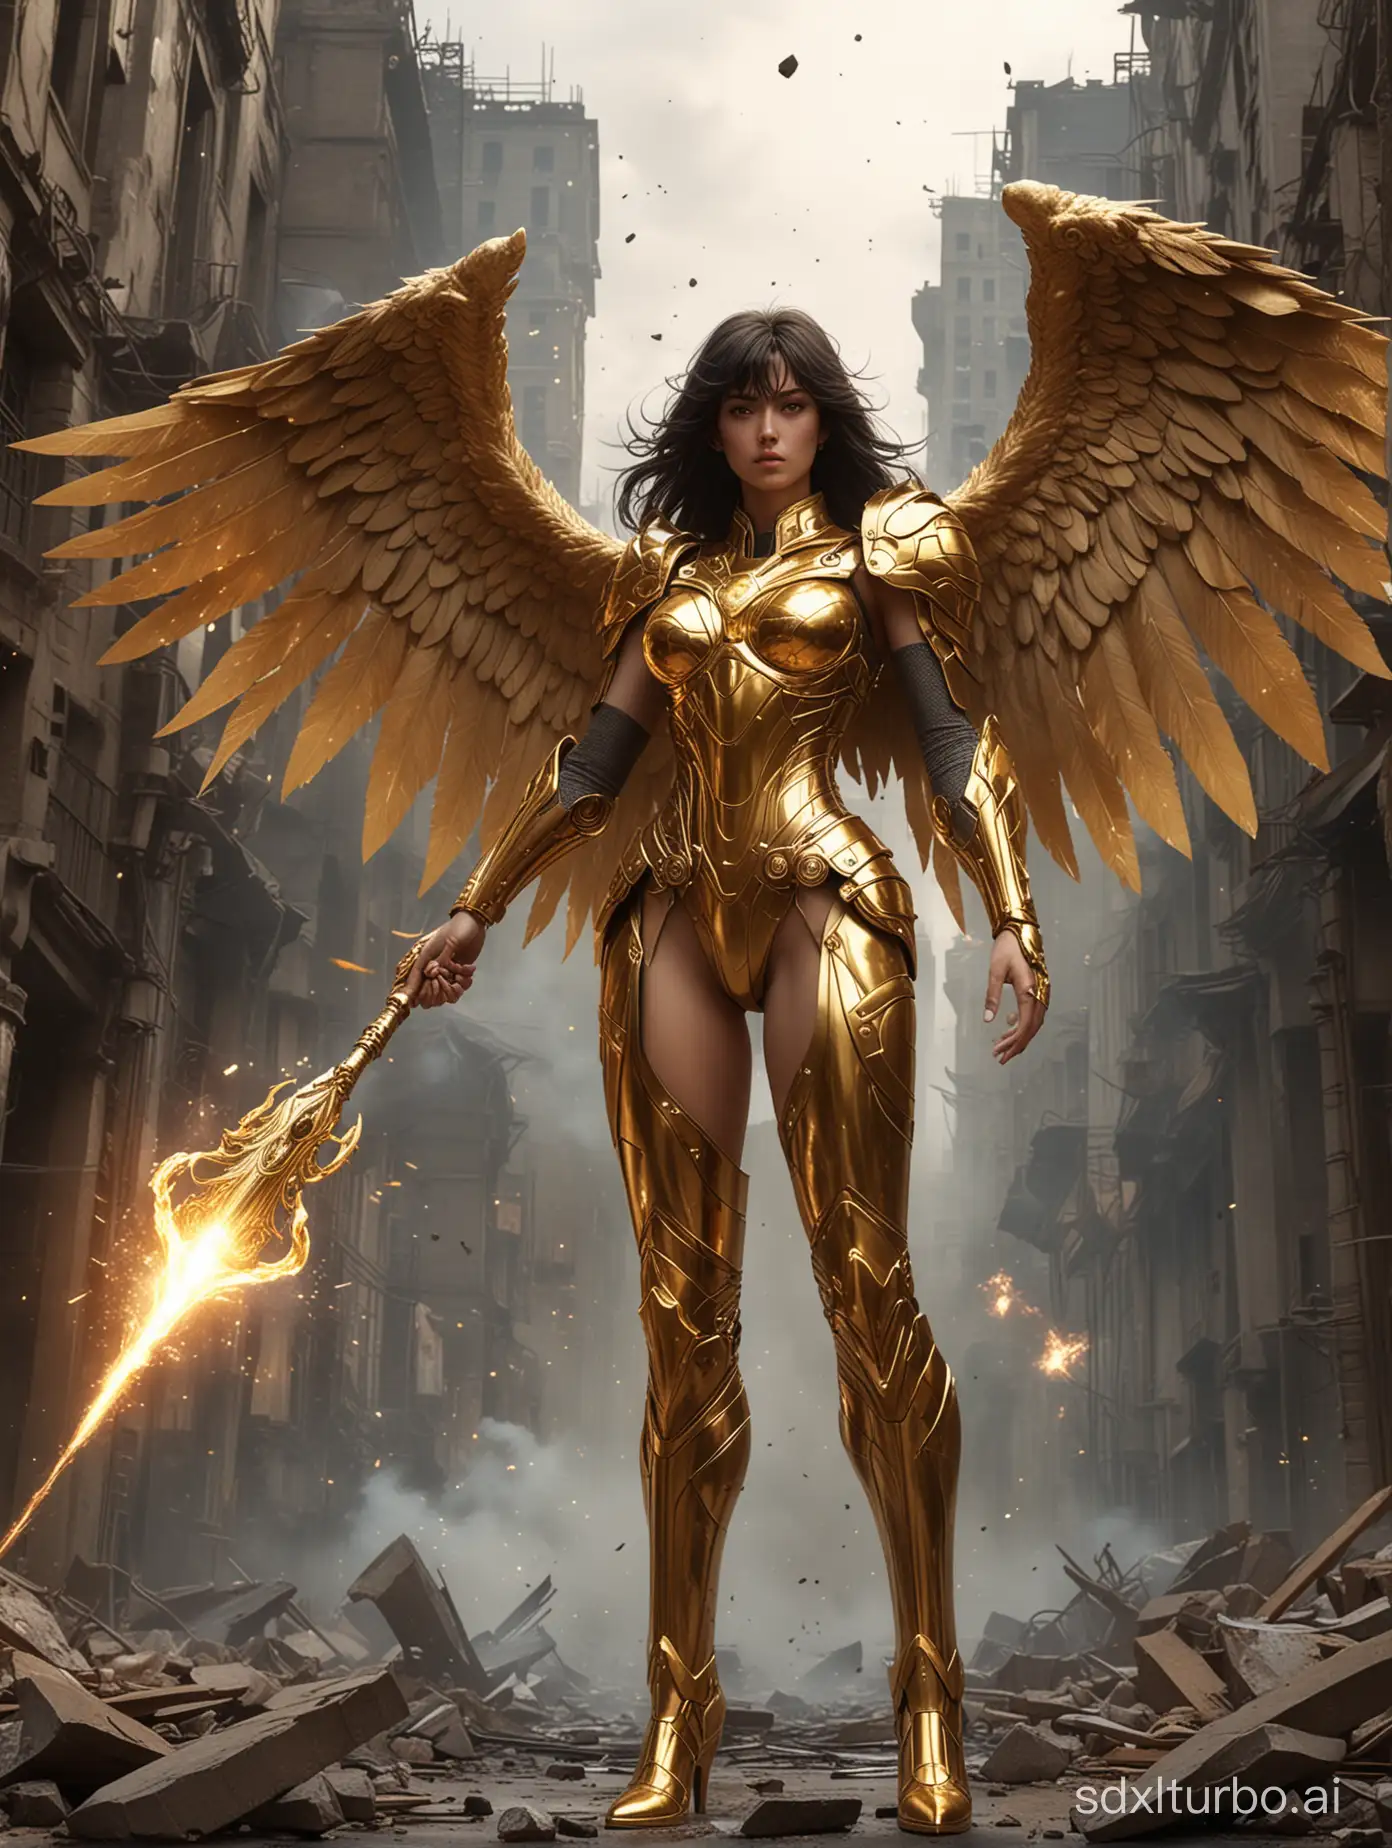 Saint Seiya manga style, Golden Saint of Scorpio, Realistic style, futuristic beautiful woman with deadly golden armor with big wings, holding a magic stone, resisting attacks from Iron Man, explosions light up the night, smoke, sparks, destroyed buildings, rubble, debris, in the style of Gerald Brom and Dan Abnet, high details, 16k, height above 175cm, slender legs, full body visible from head to feet